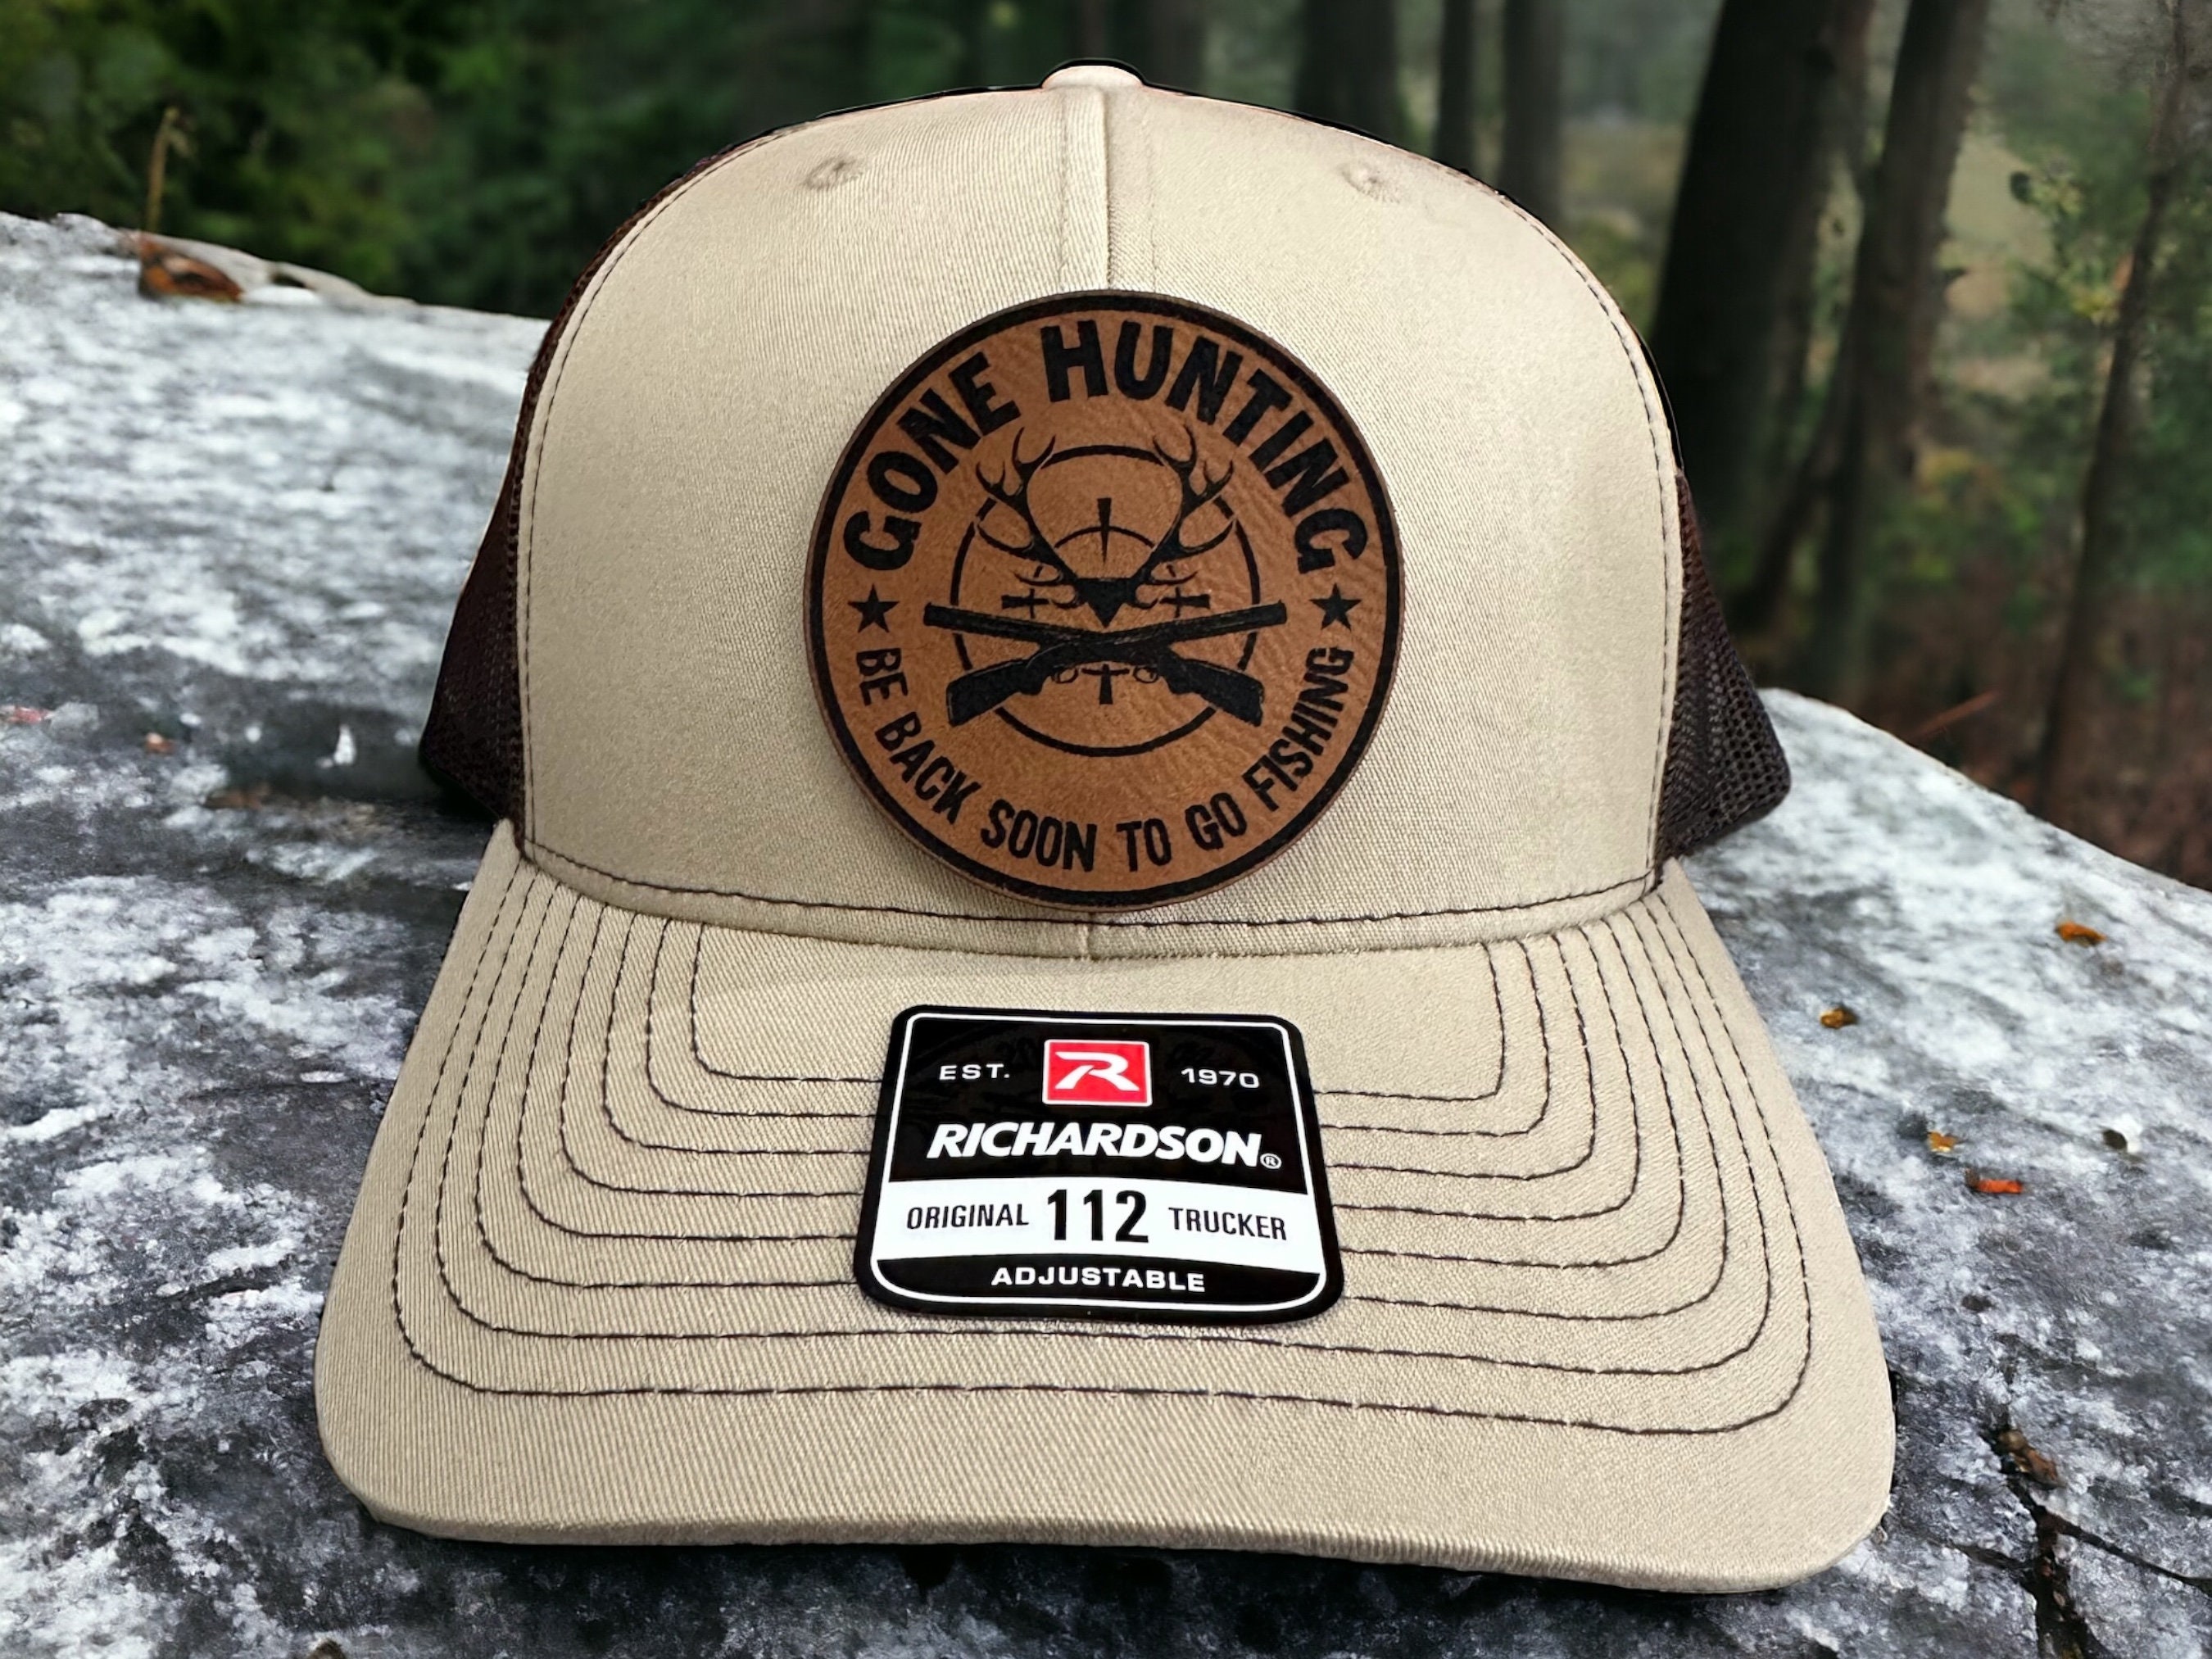 Gone Hunting Leather Patch Hat Funny Hunt and Fish Custom Trucker